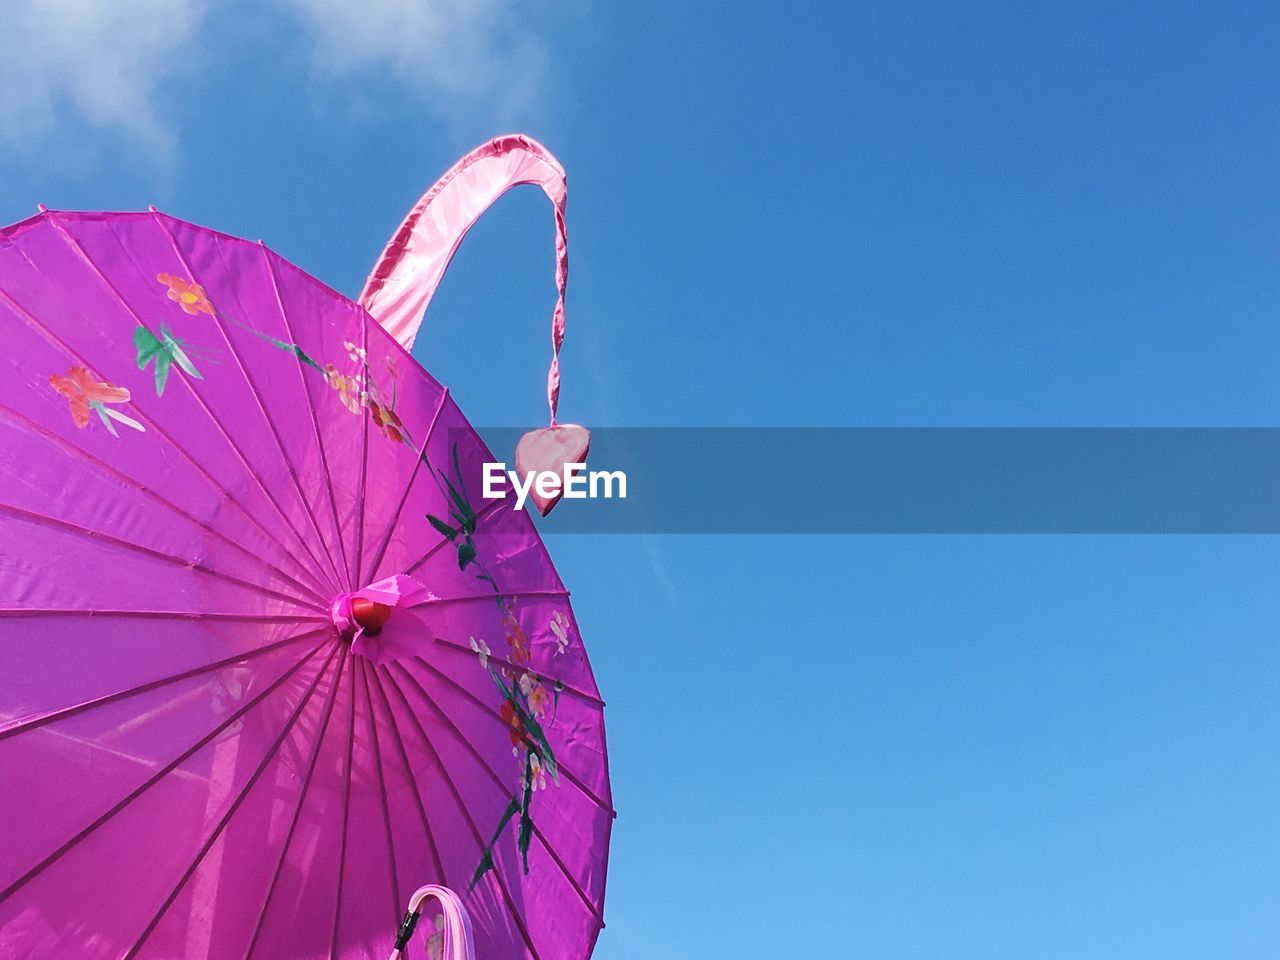 Low angle view of pink parasol against blue sky